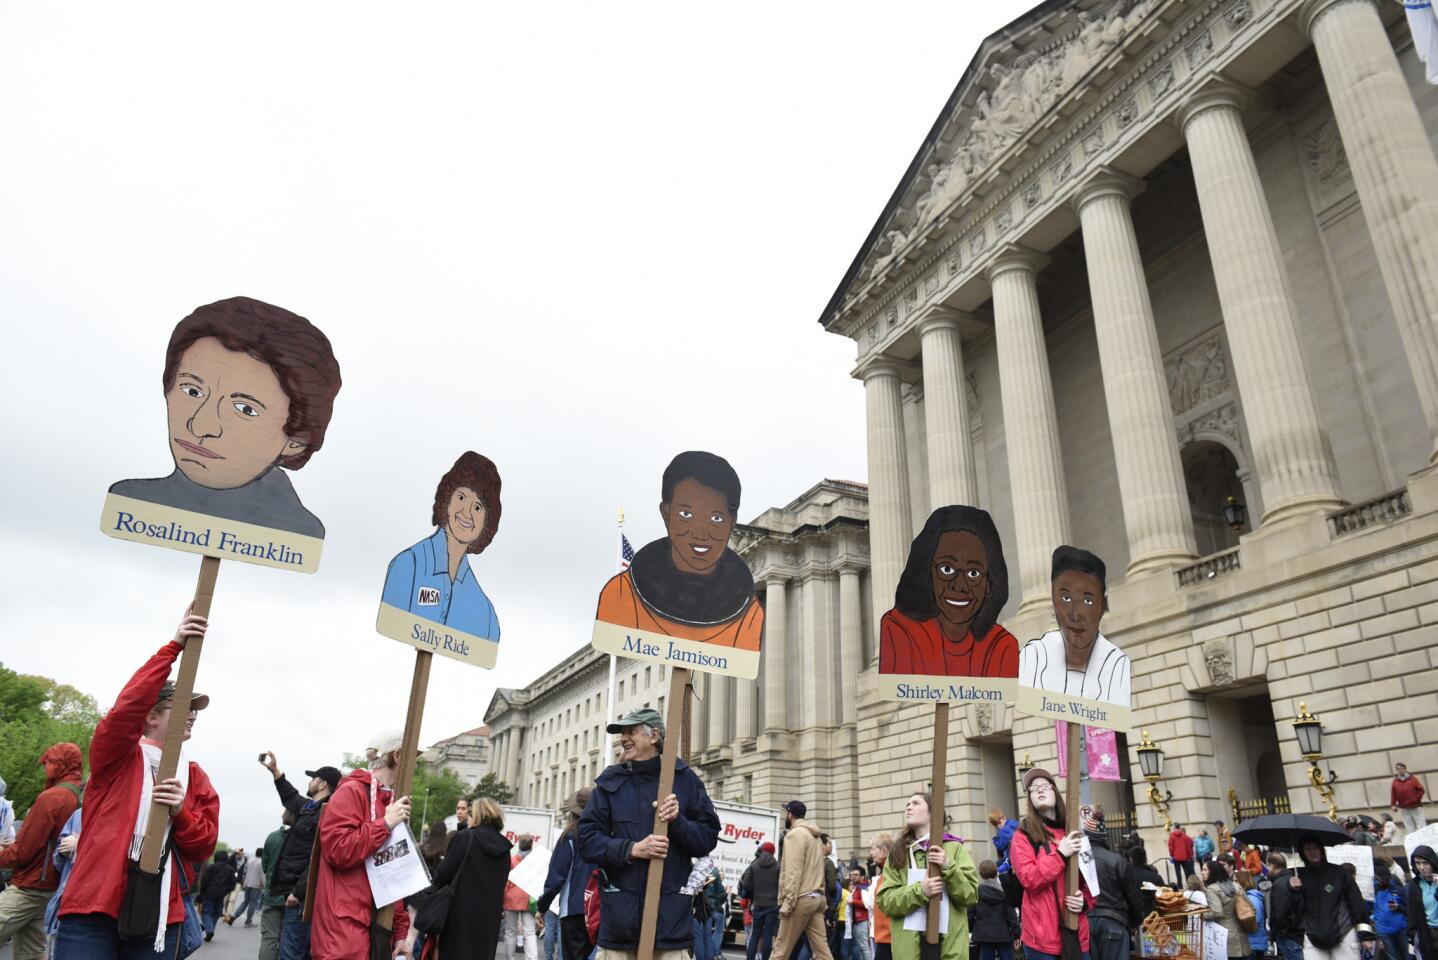 People hold signs of poineering women in science in front the U.S. Environmental Protection Agency during the March for Science in Washington, Saturday, April 22, 2017.